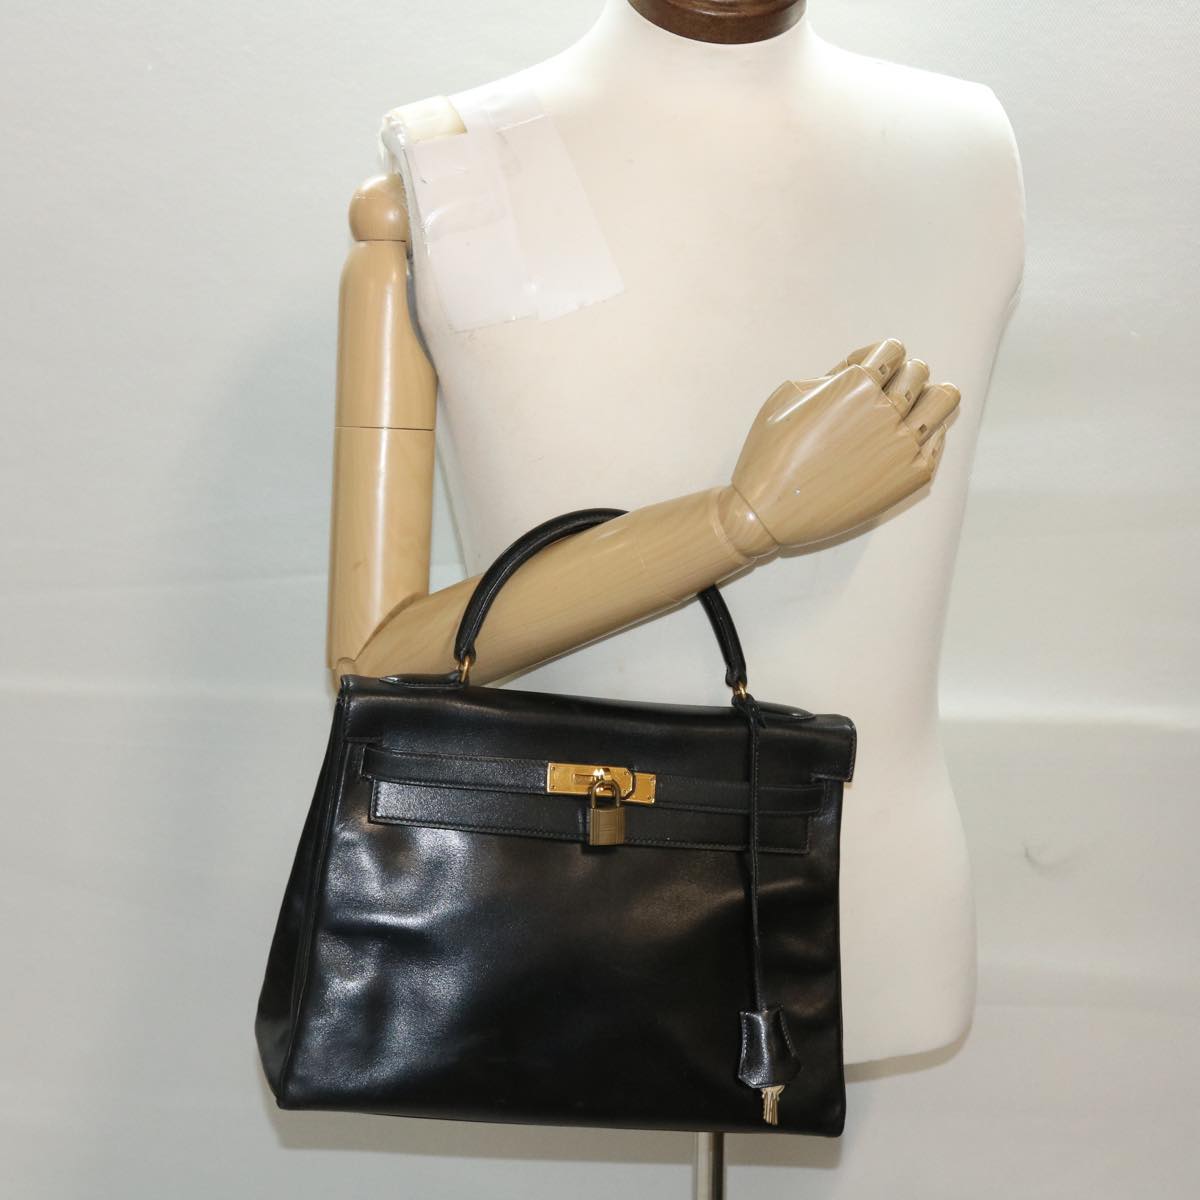 HERMES Kelly 32 Hand Bag Leather Black Auth ni110A